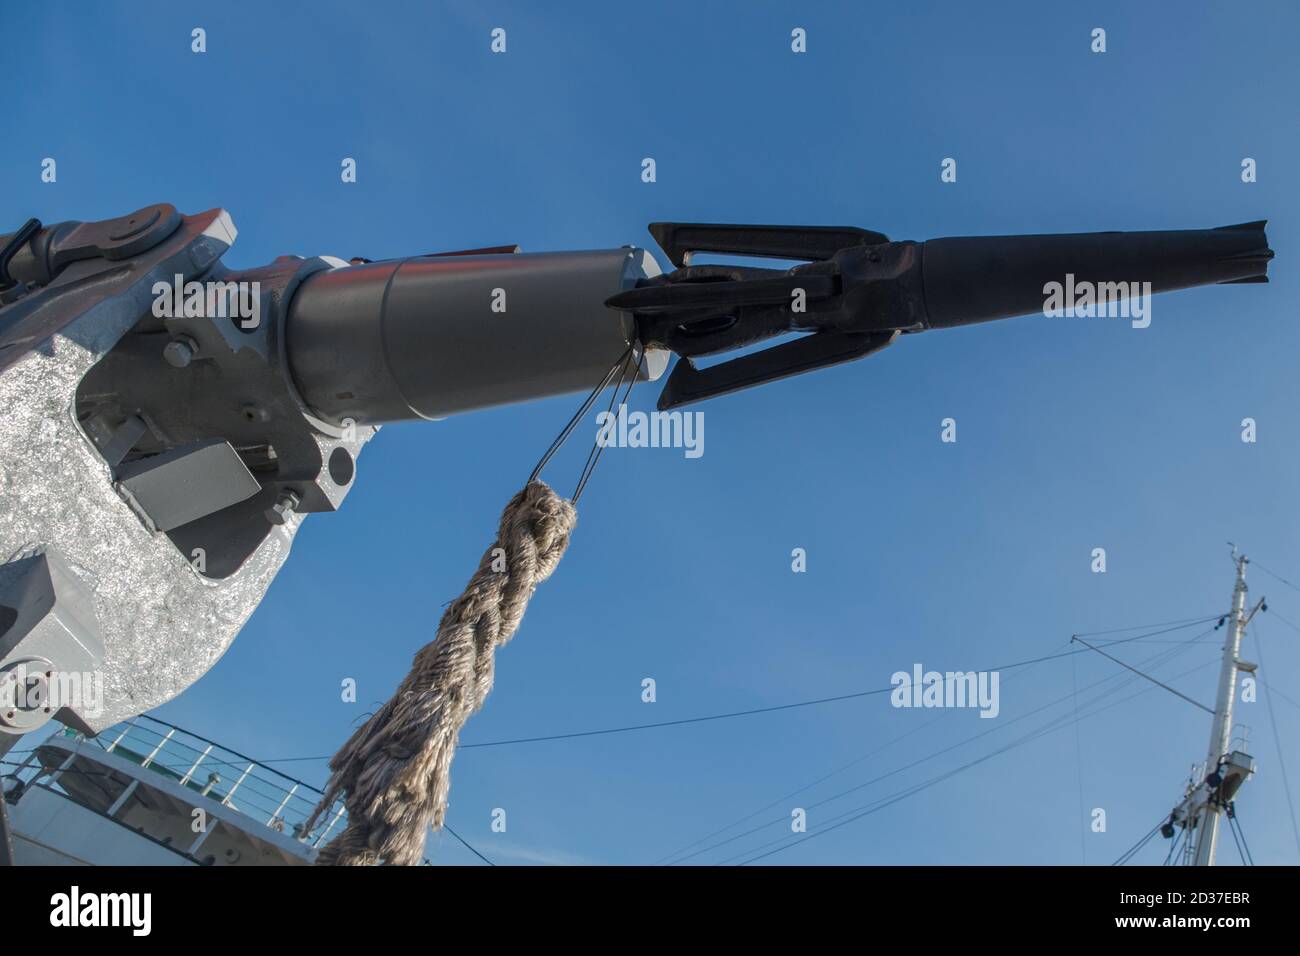 https://c8.alamy.com/comp/2D37EBR/gray-cannon-harpoon-with-black-tip-mounted-in-mouth-holder-with-braided-rope-attached-to-it-against-blue-sky-and-fragment-of-top-of-deck-and-mast-2D37EBR.jpg